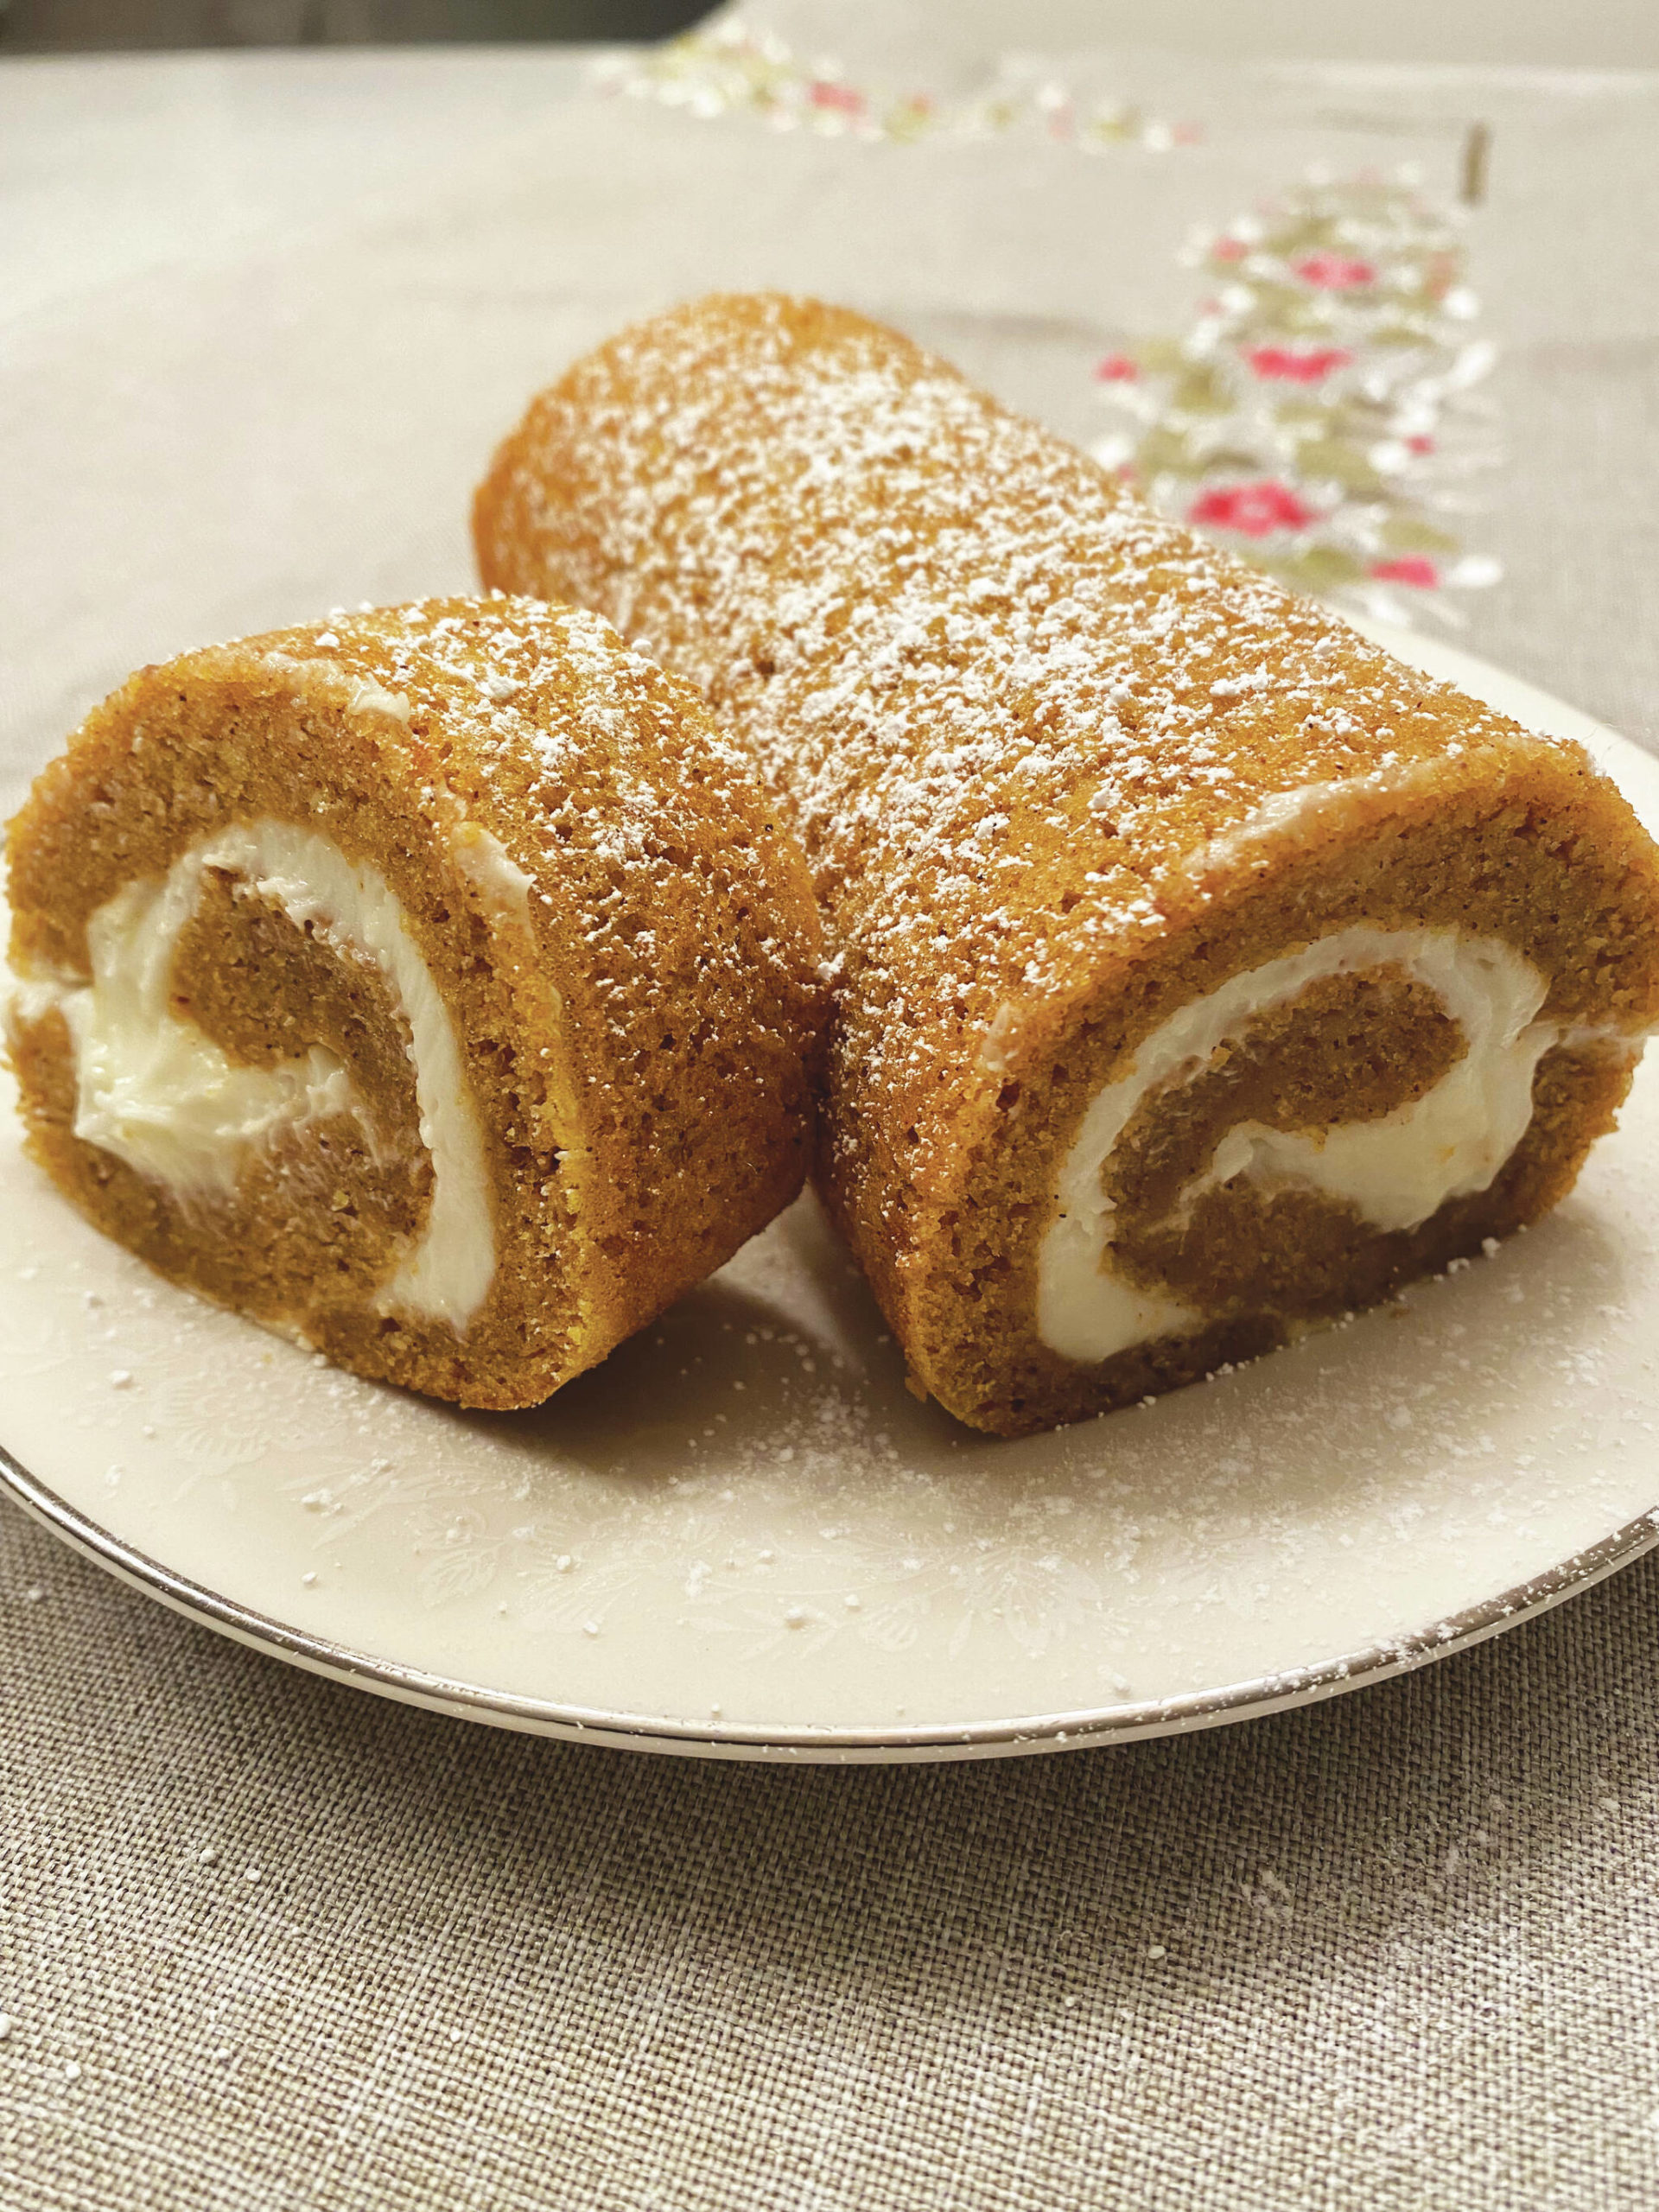 Photo by Tressa Dale/Peninsula Clarion
A pumpkin spice roll with cream cheese filling is photographed on Oct. 31, 2022, in Nikiski, Alaska.